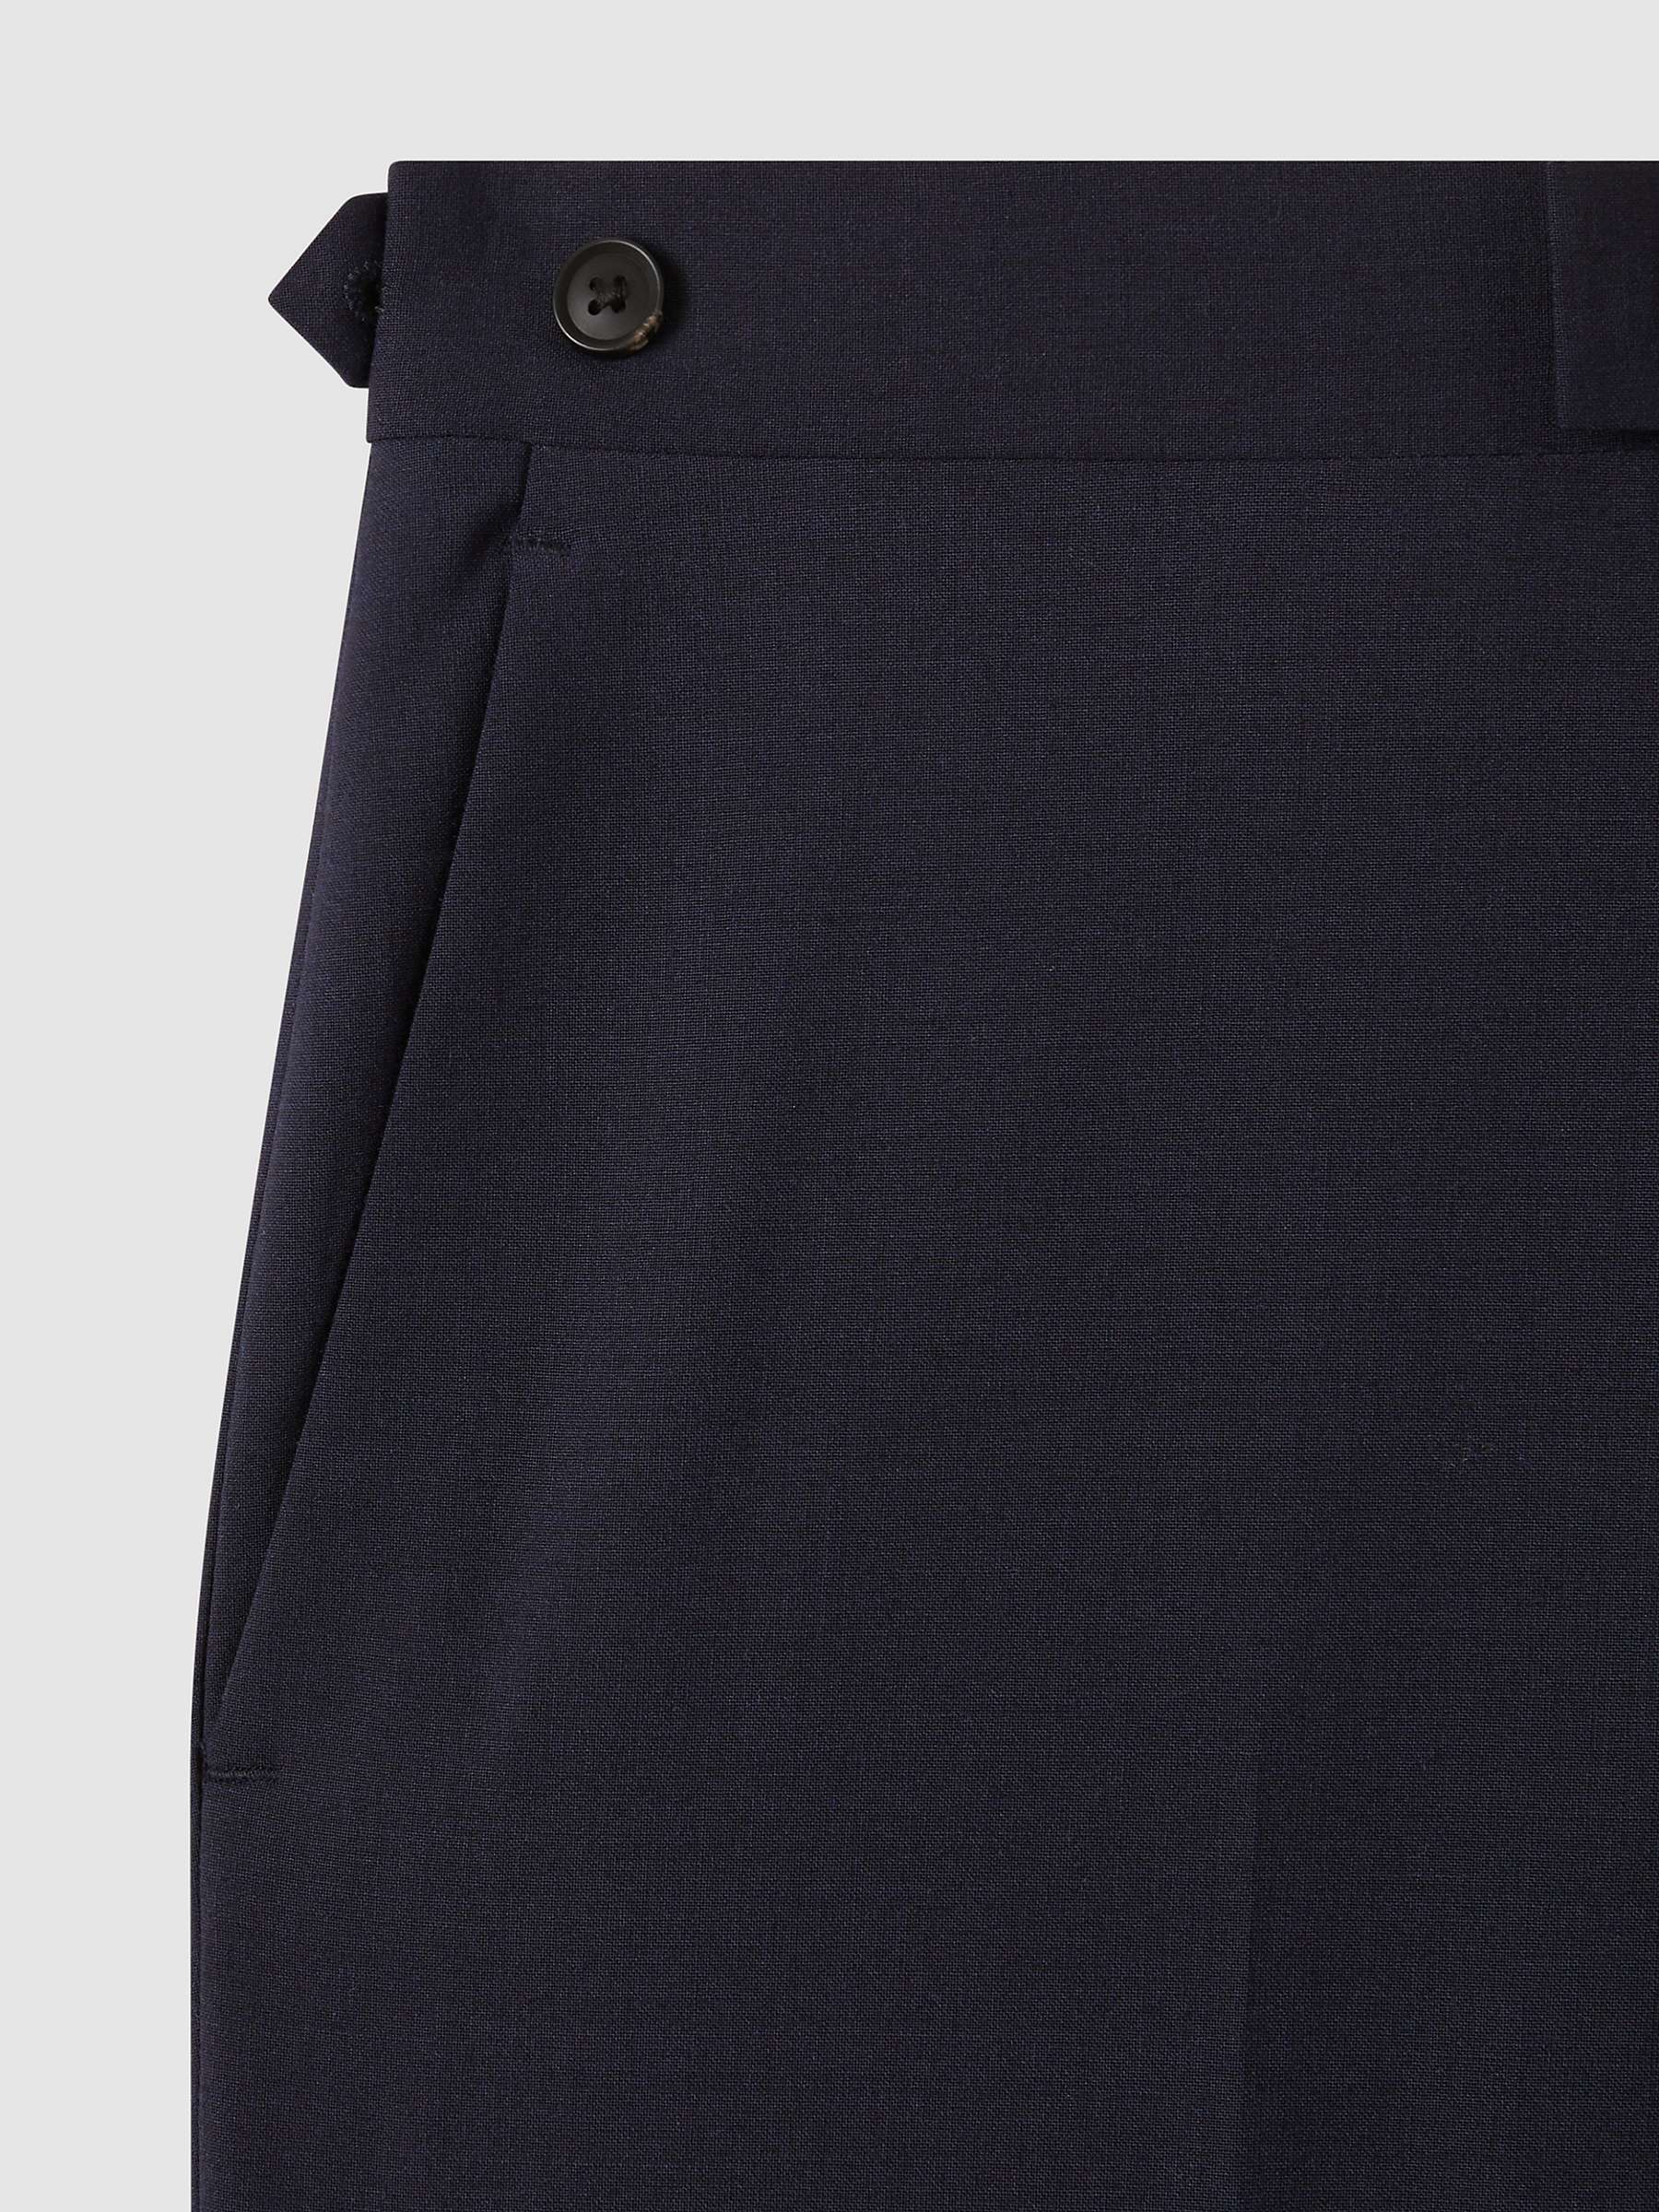 Buy Reiss Hope Modern Fit Travel Trousers, Navy Online at johnlewis.com